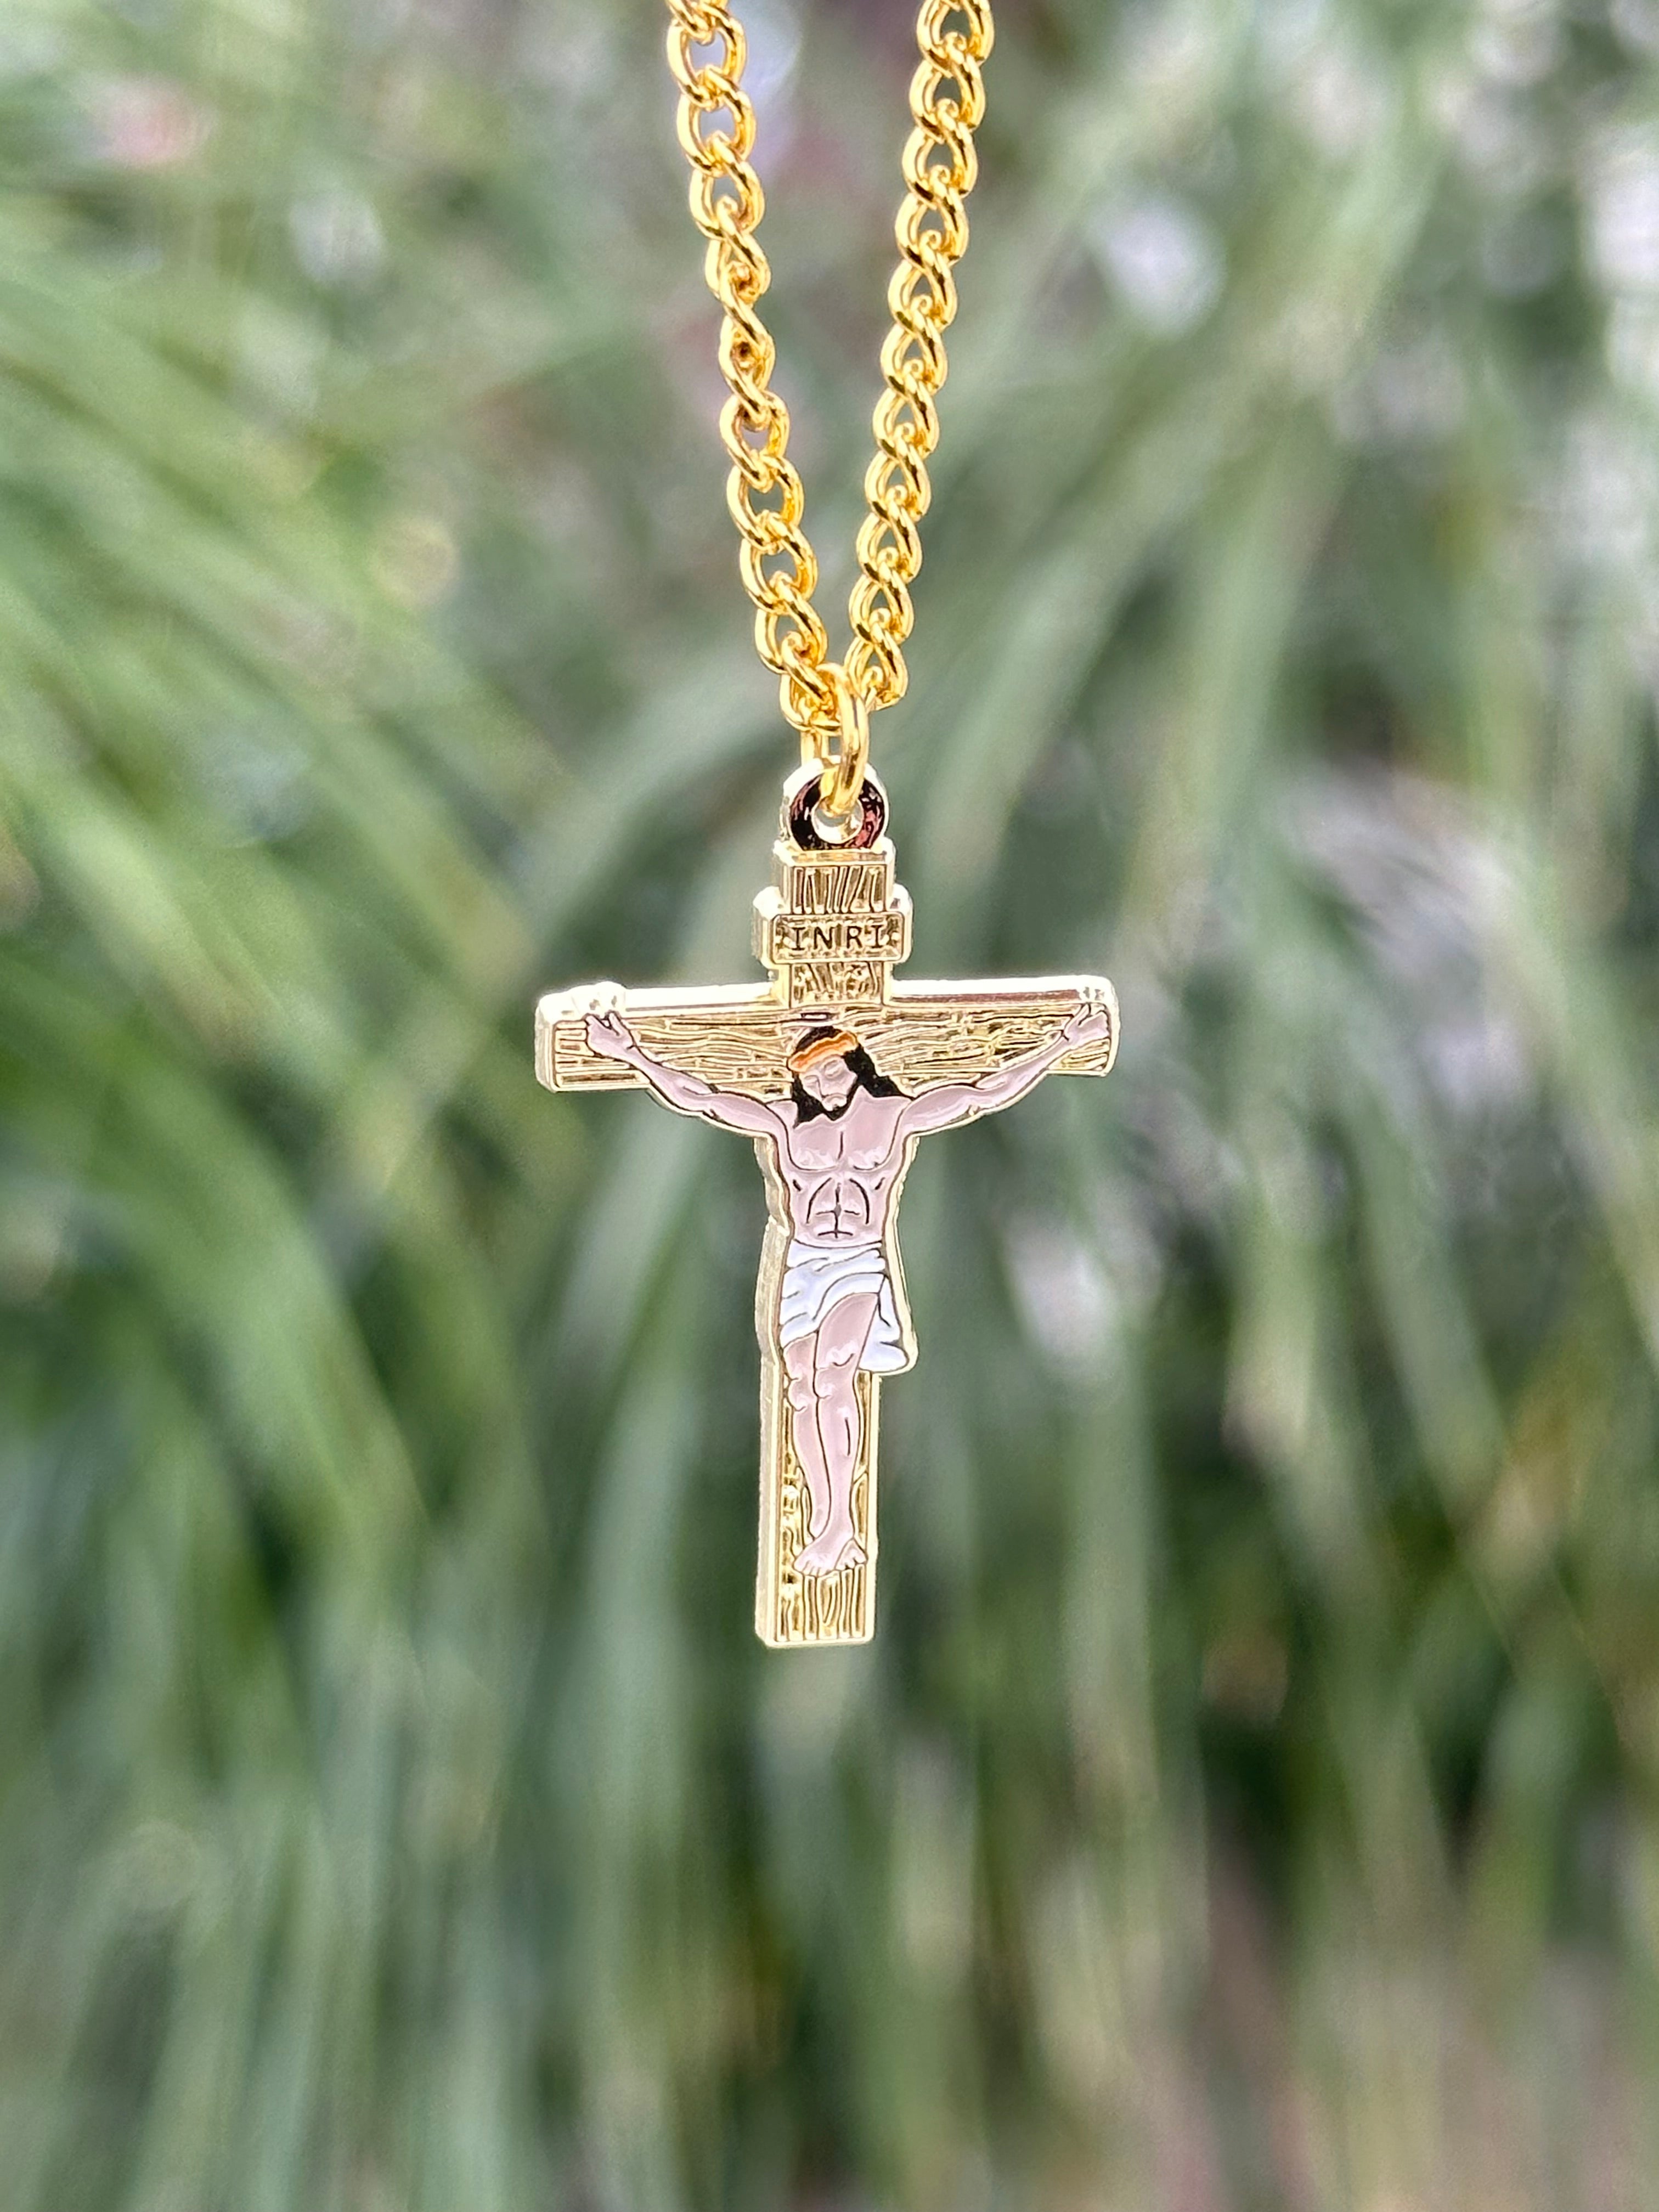 *NEW GOLD "JESUS CHRIST" EXCLUSIVE CHAIN VERY LIMITED